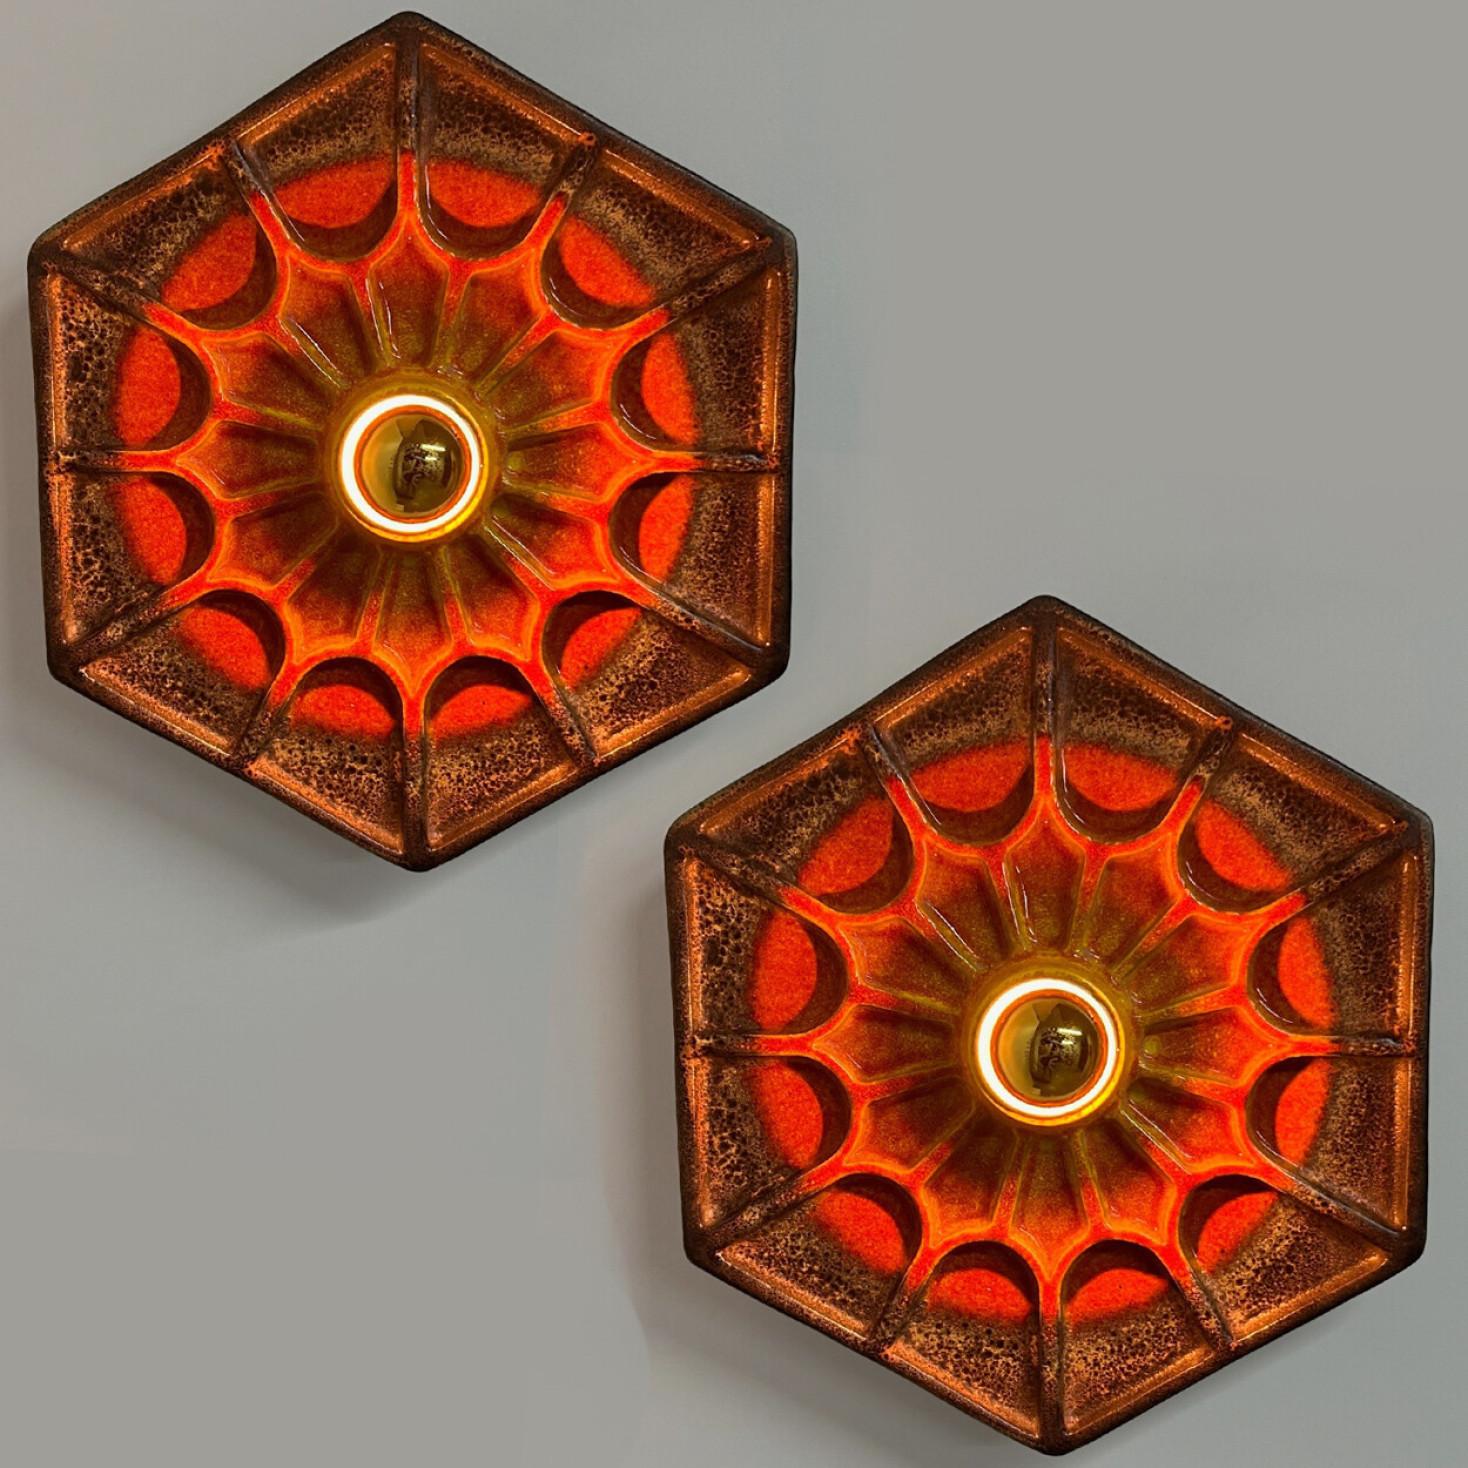 Pair of Orange Hex-shaped Ceramic Wall Lights, Germany, 1970 For Sale 1